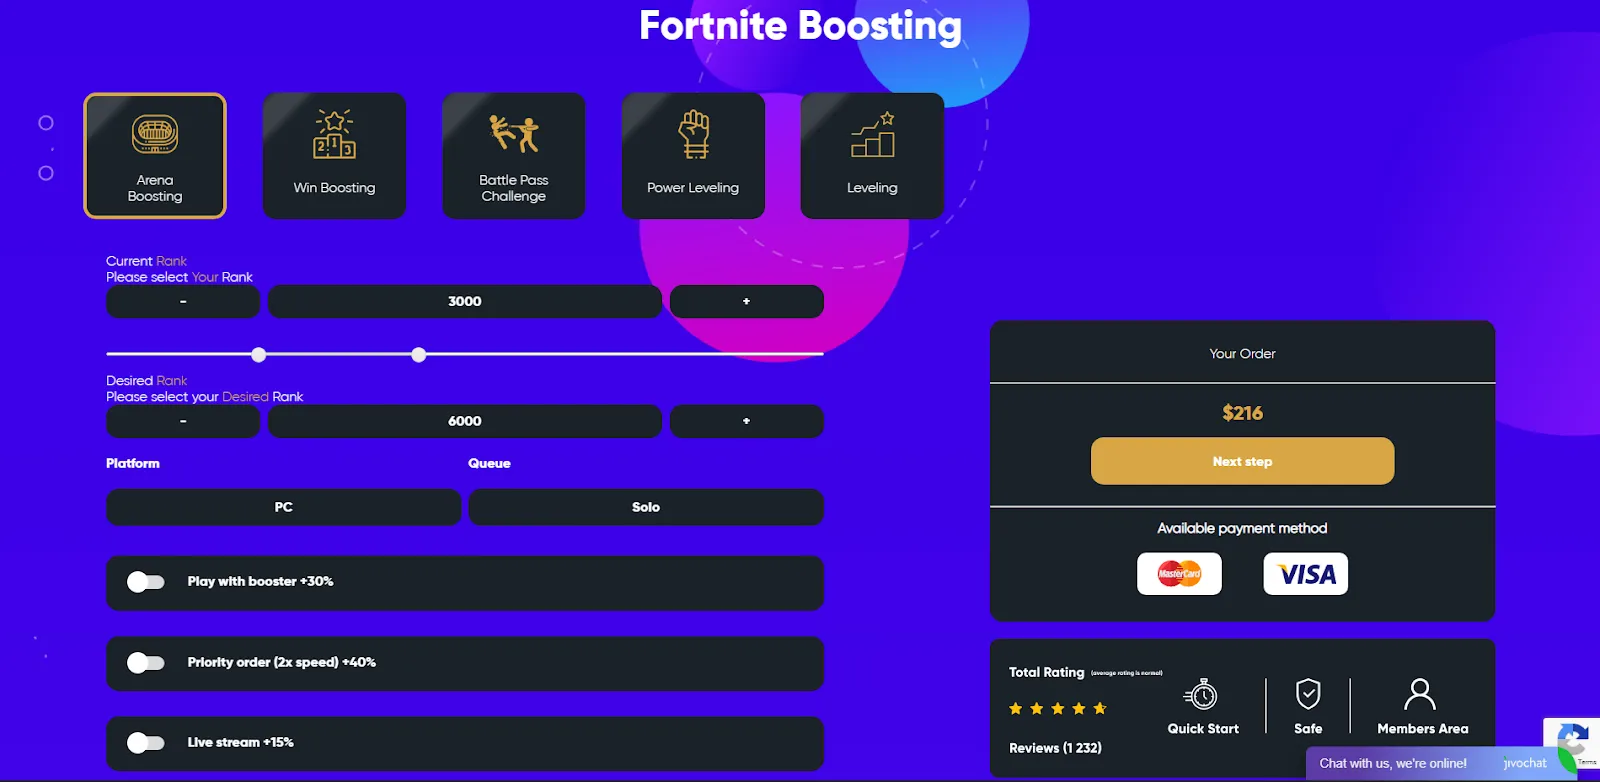 An example of Fortnite Boosting service.